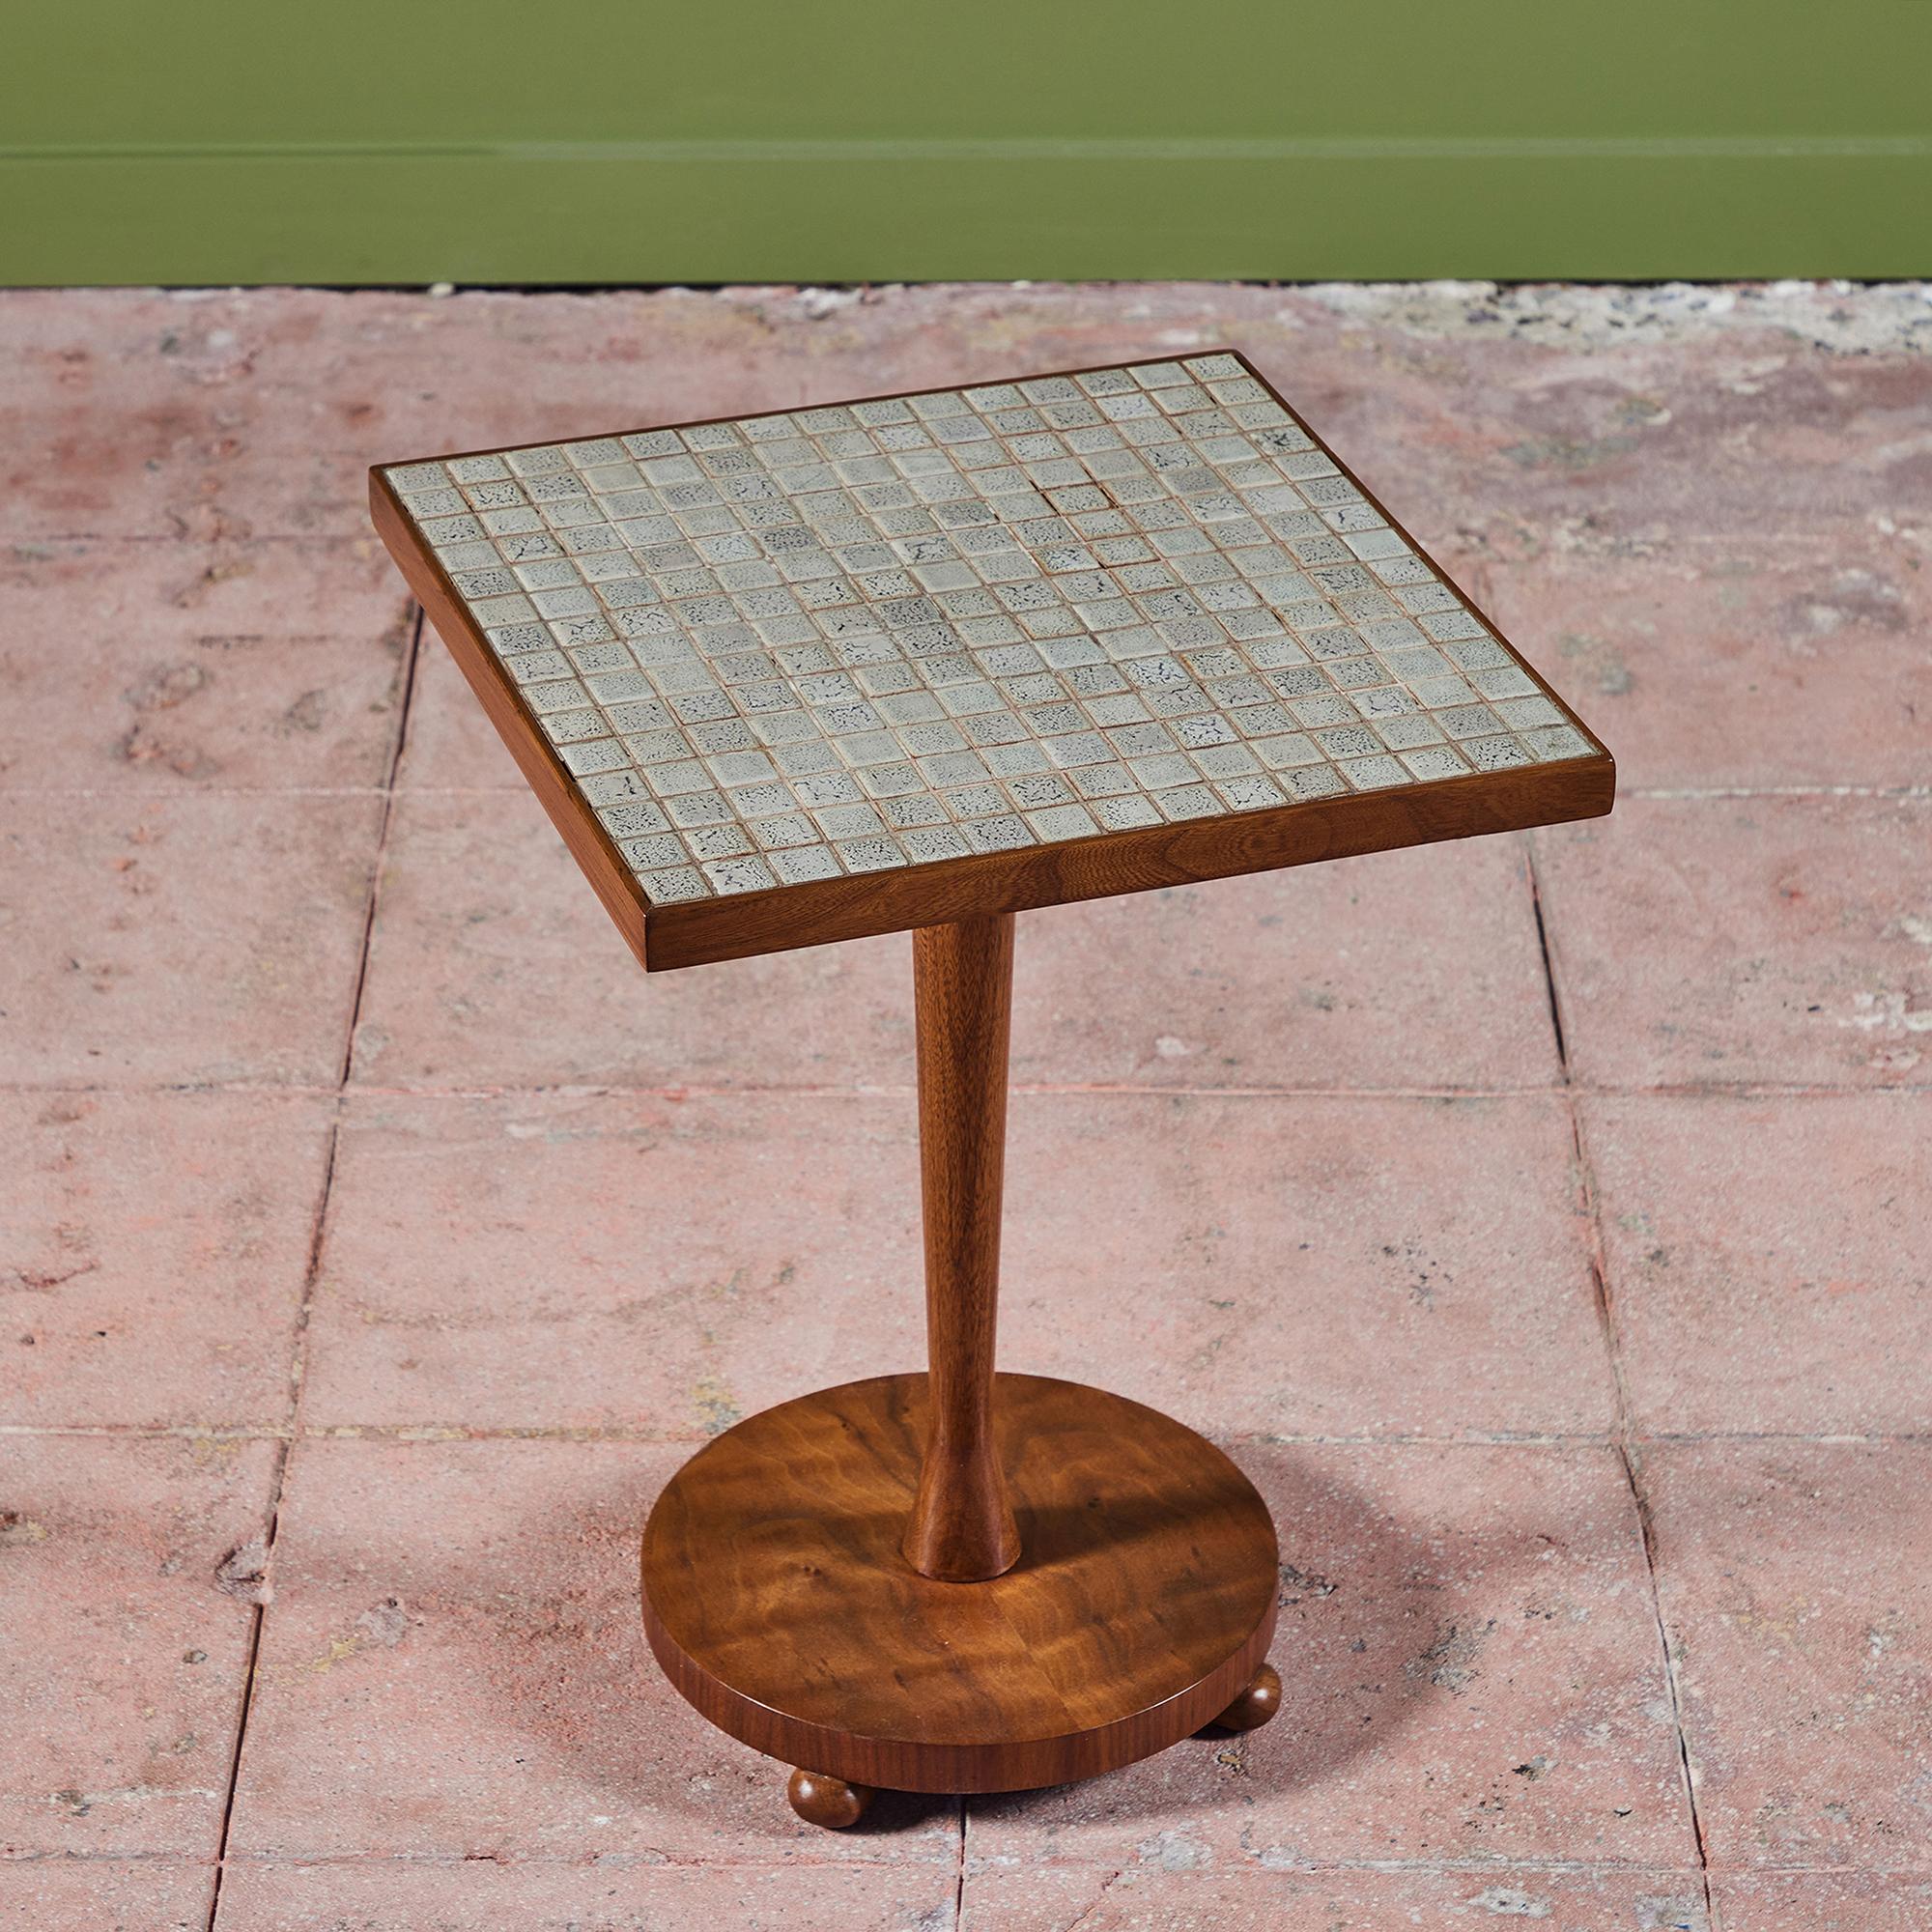 Square pedestal side table for Lane, c.1960s, USA. The teak table top is inlaid with square speckled ceramic tiles in gray and cream. The base of the table is a tapered teak dowel on a circular base with three ball feet.

Dimensions
15.5